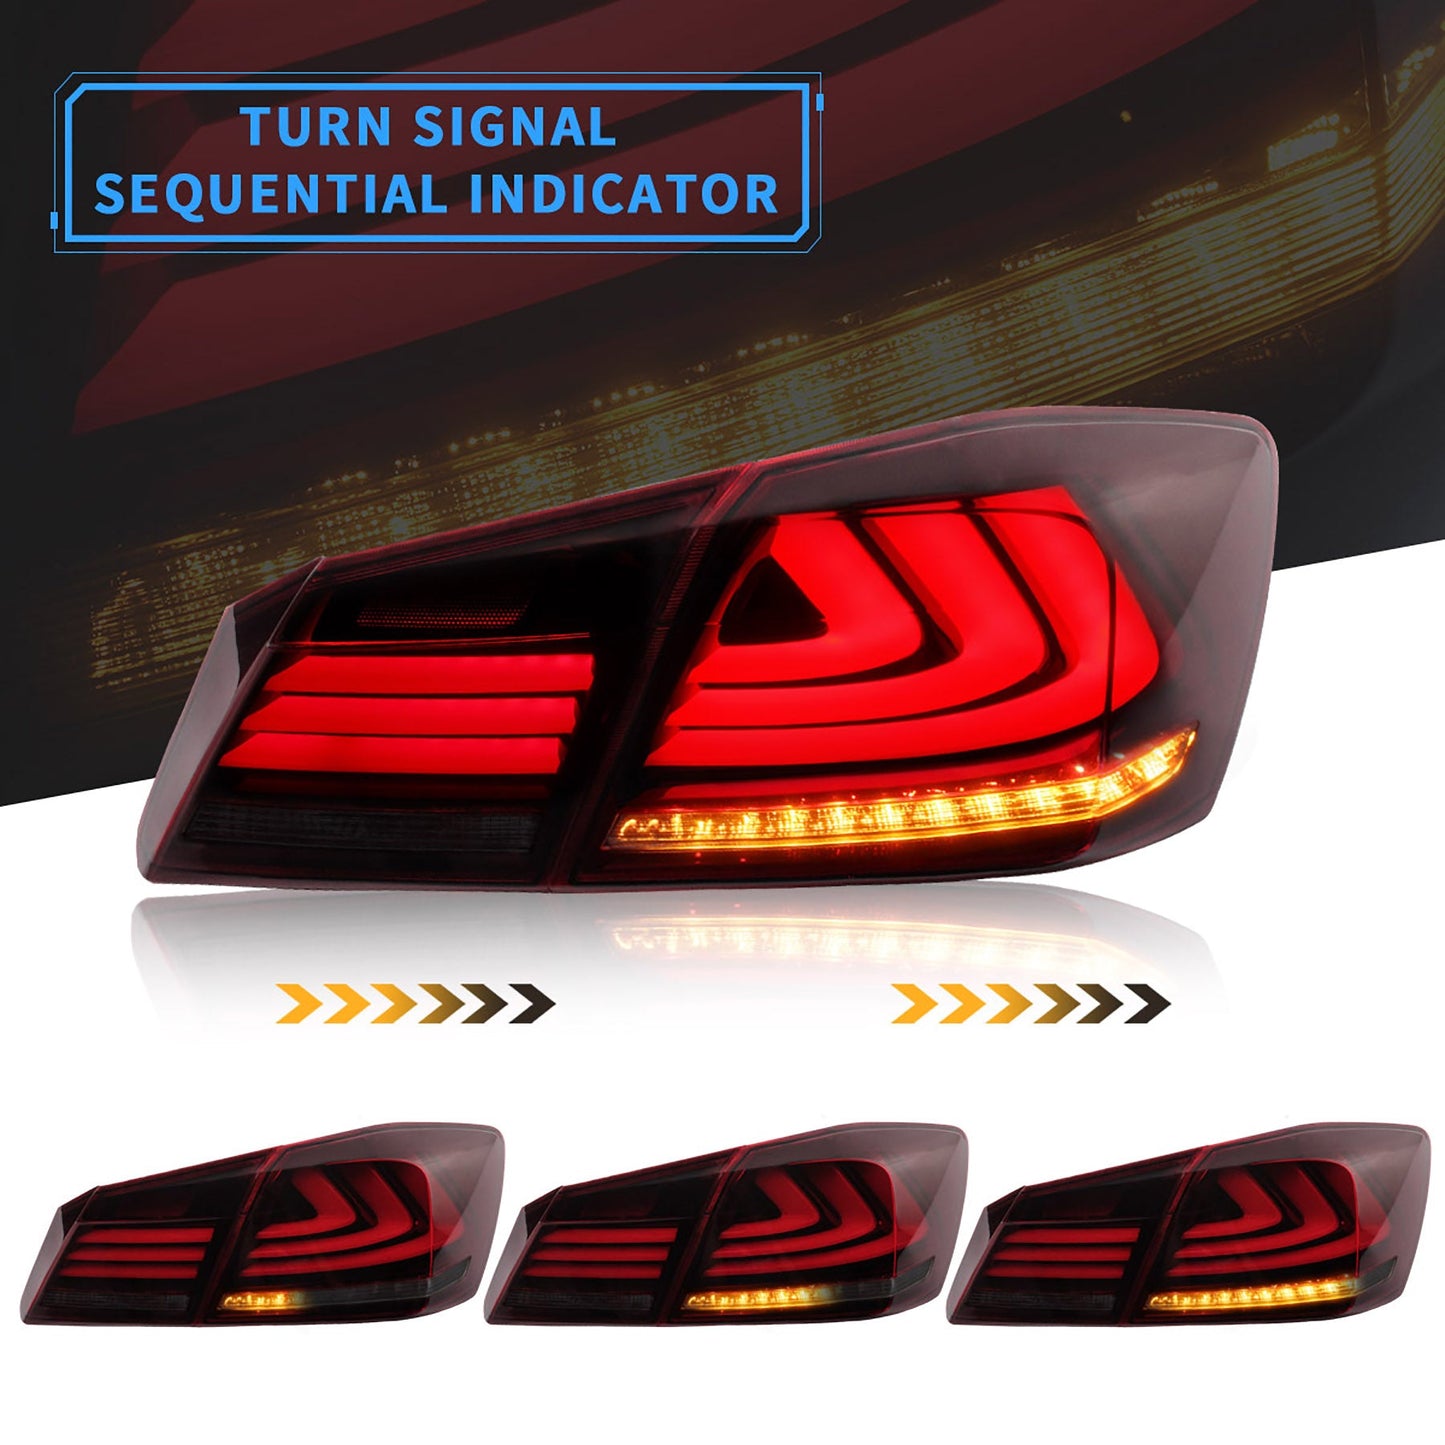 VLAND 13-15 Accord Full LED Sequential Tail Lights ABS PMMA GLASS Material